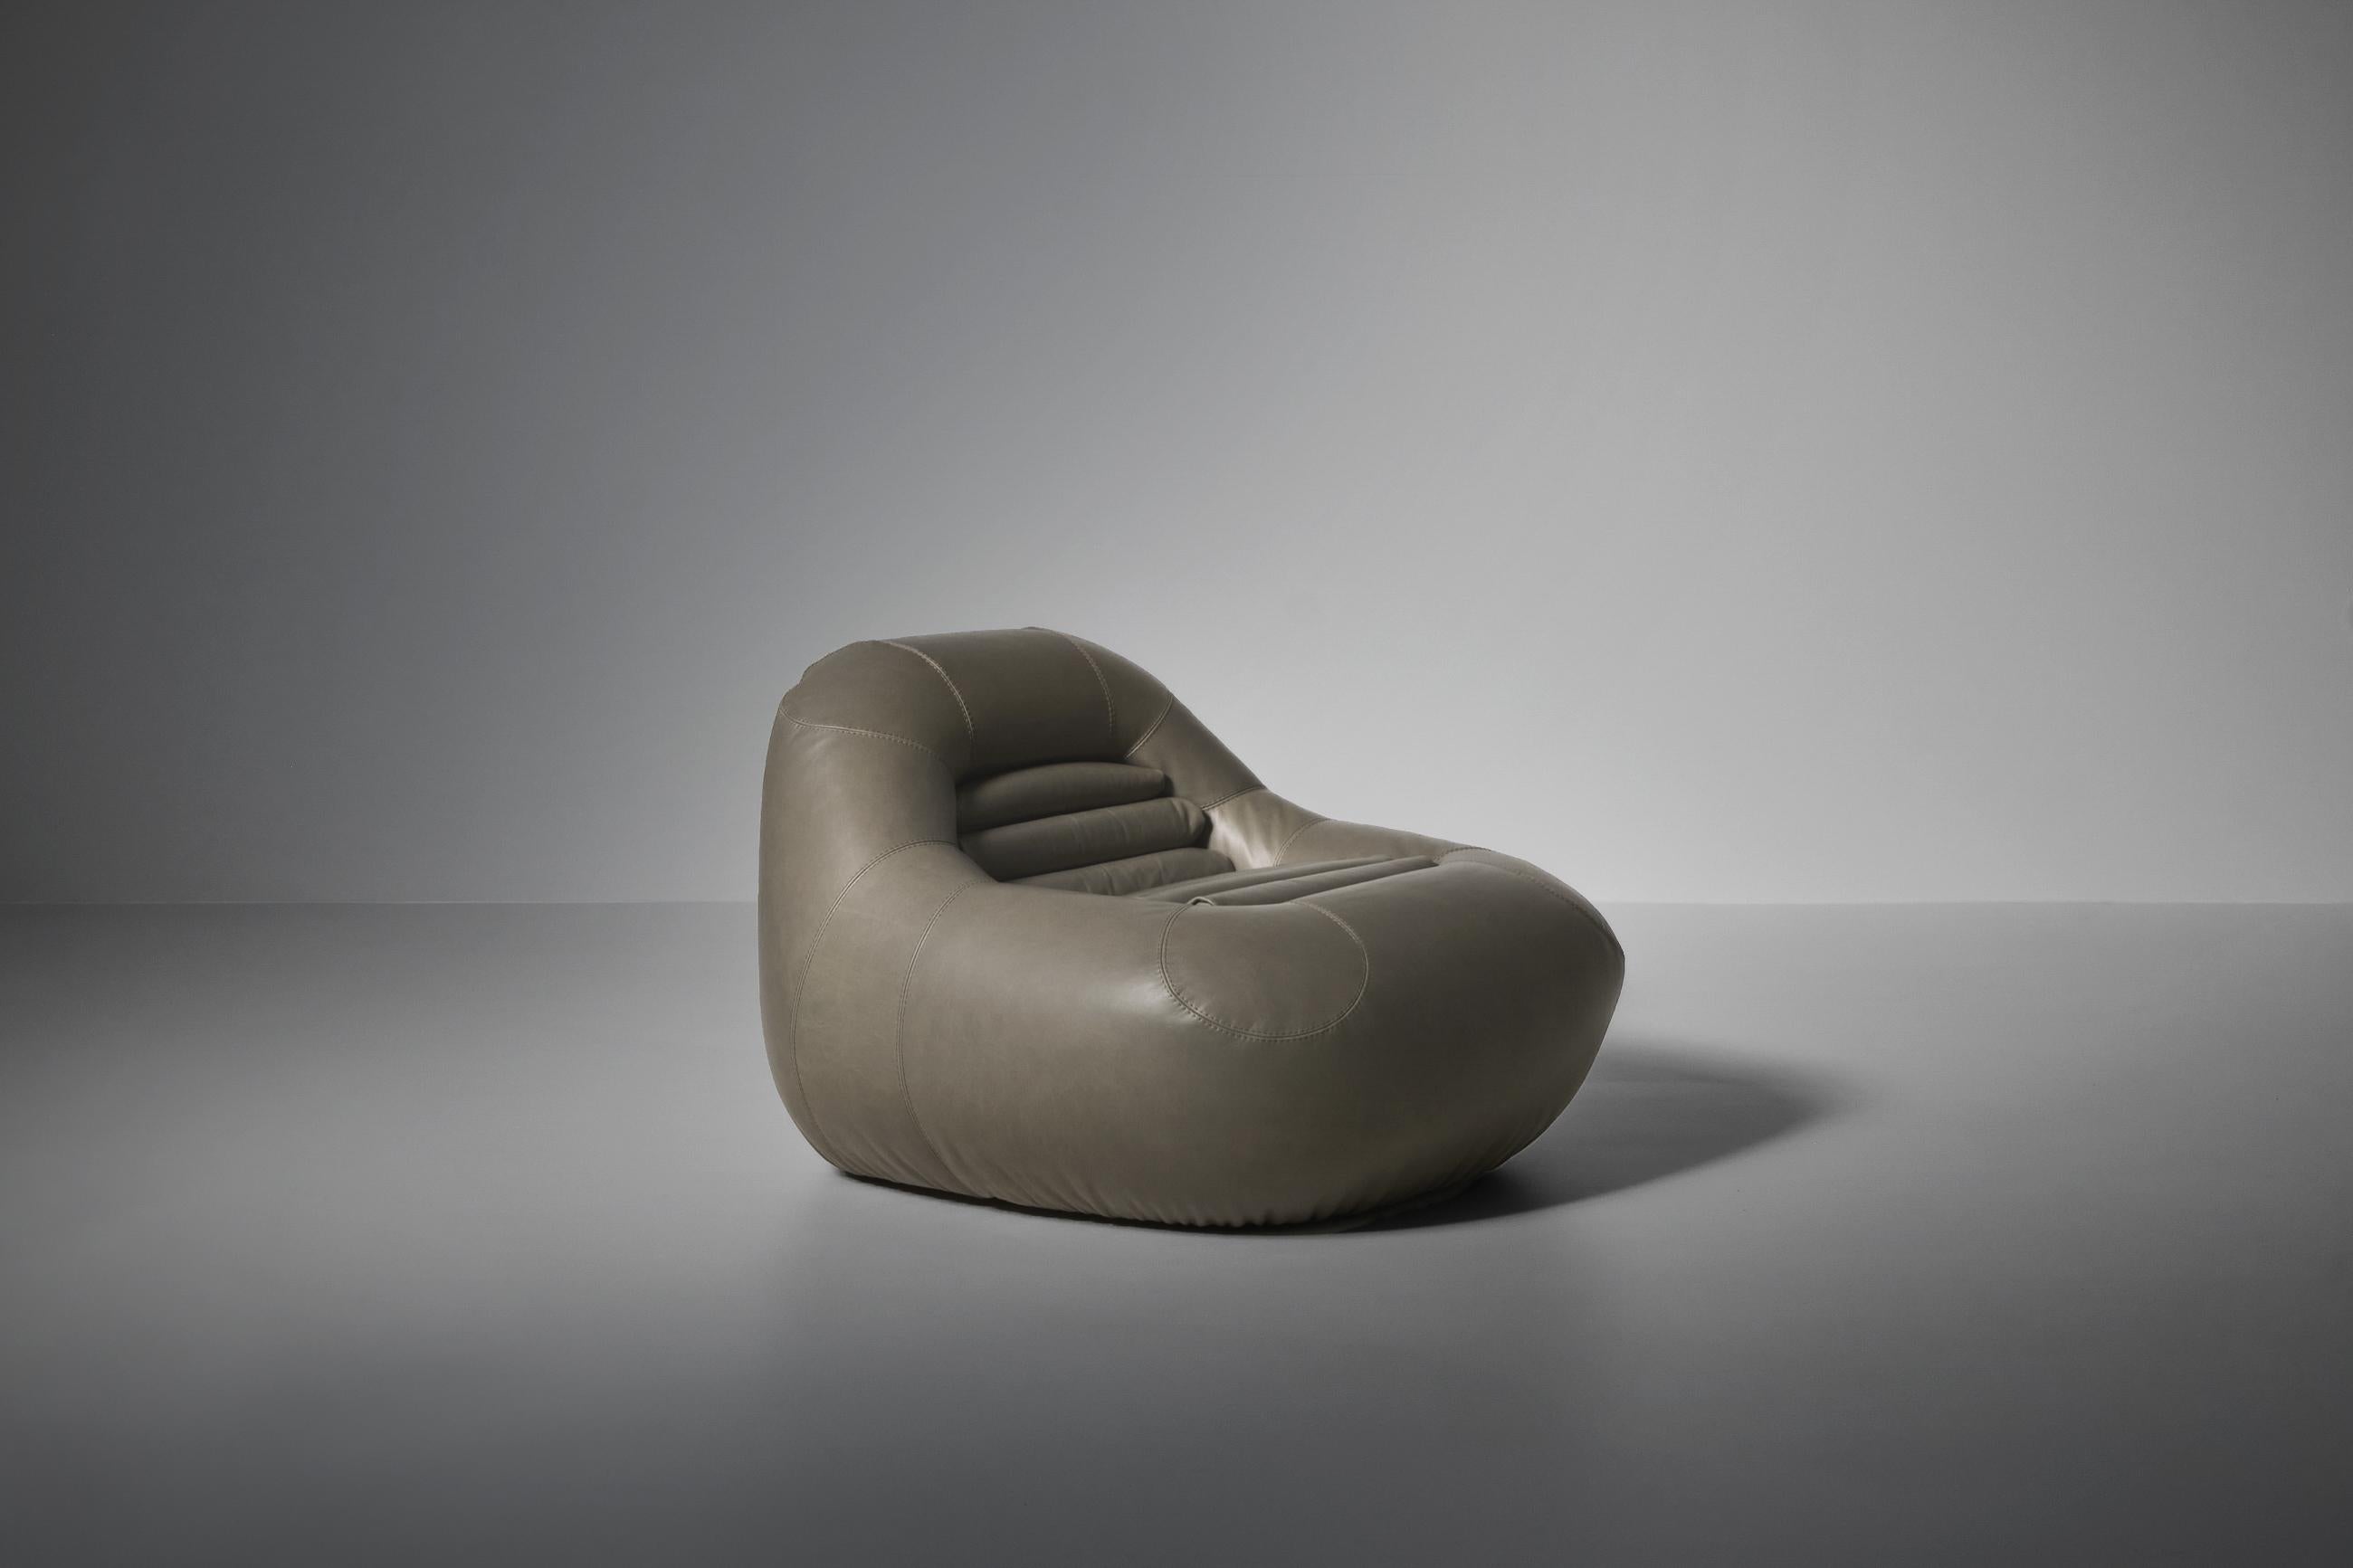 Lounge chair mod. 'Carrera' in leather by De Pas, D'Urbino & Lomazzi for BBB Bonacina, Italy ca. 1965. Iconic model and hard to find as a single lounge chair. Fantastic eye catching bulky shaped design. The chair has been fully redone with the the